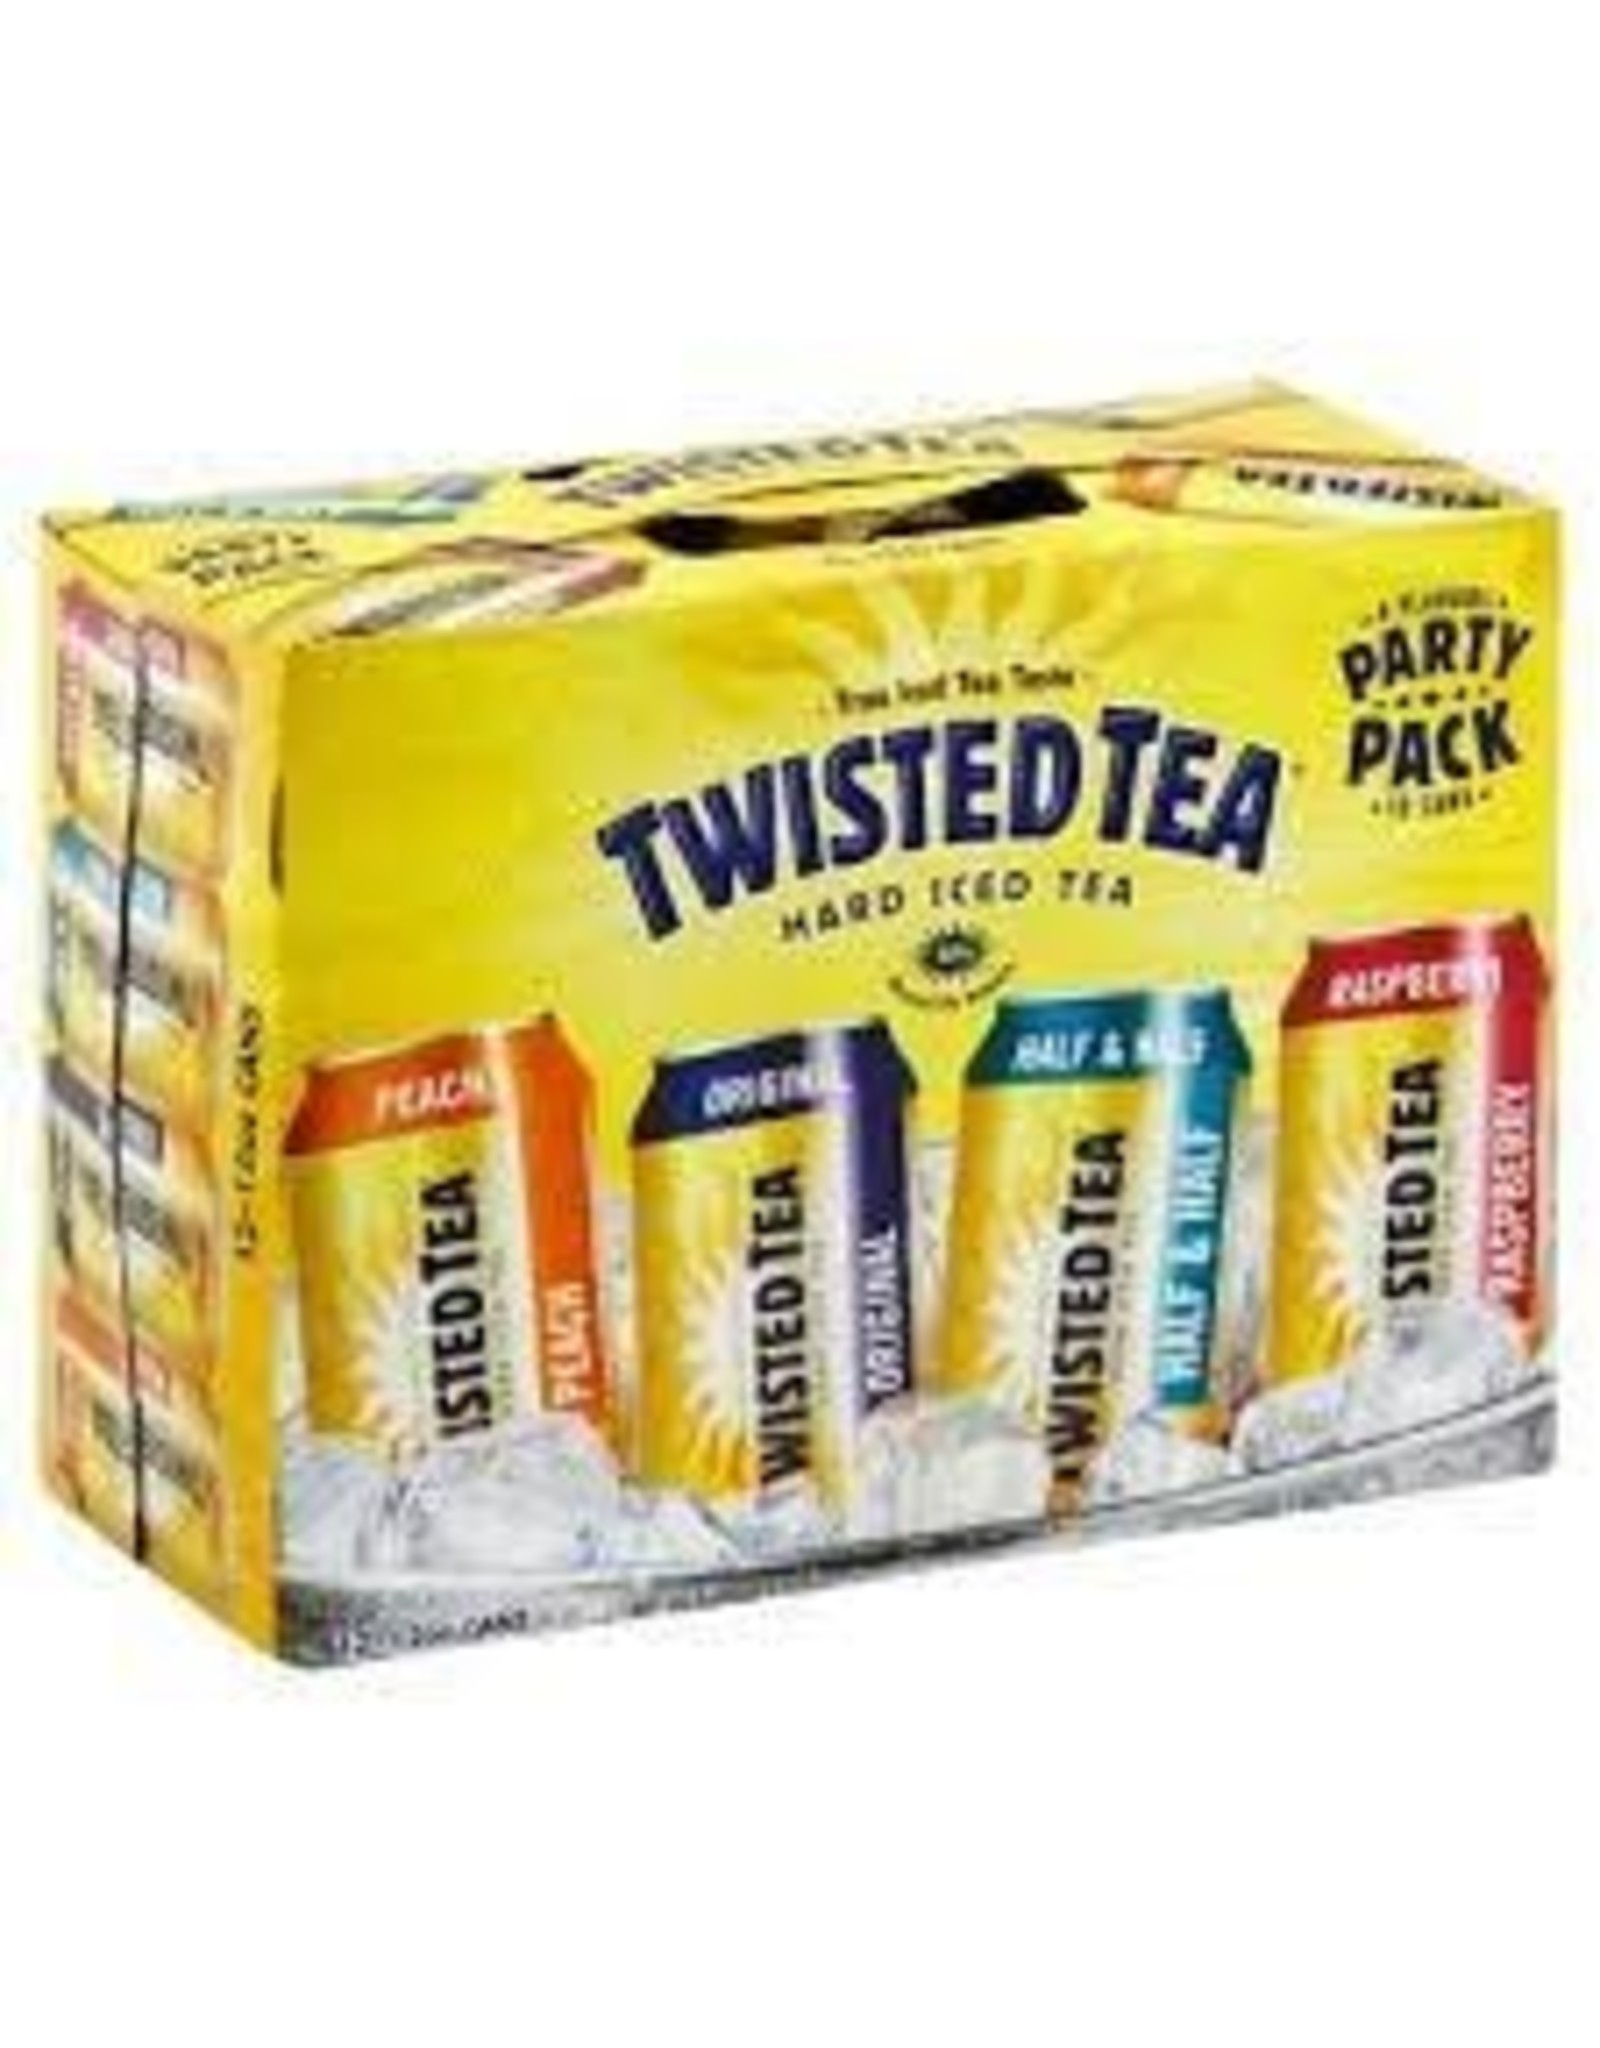 TWISTED TEA PARTY PACK